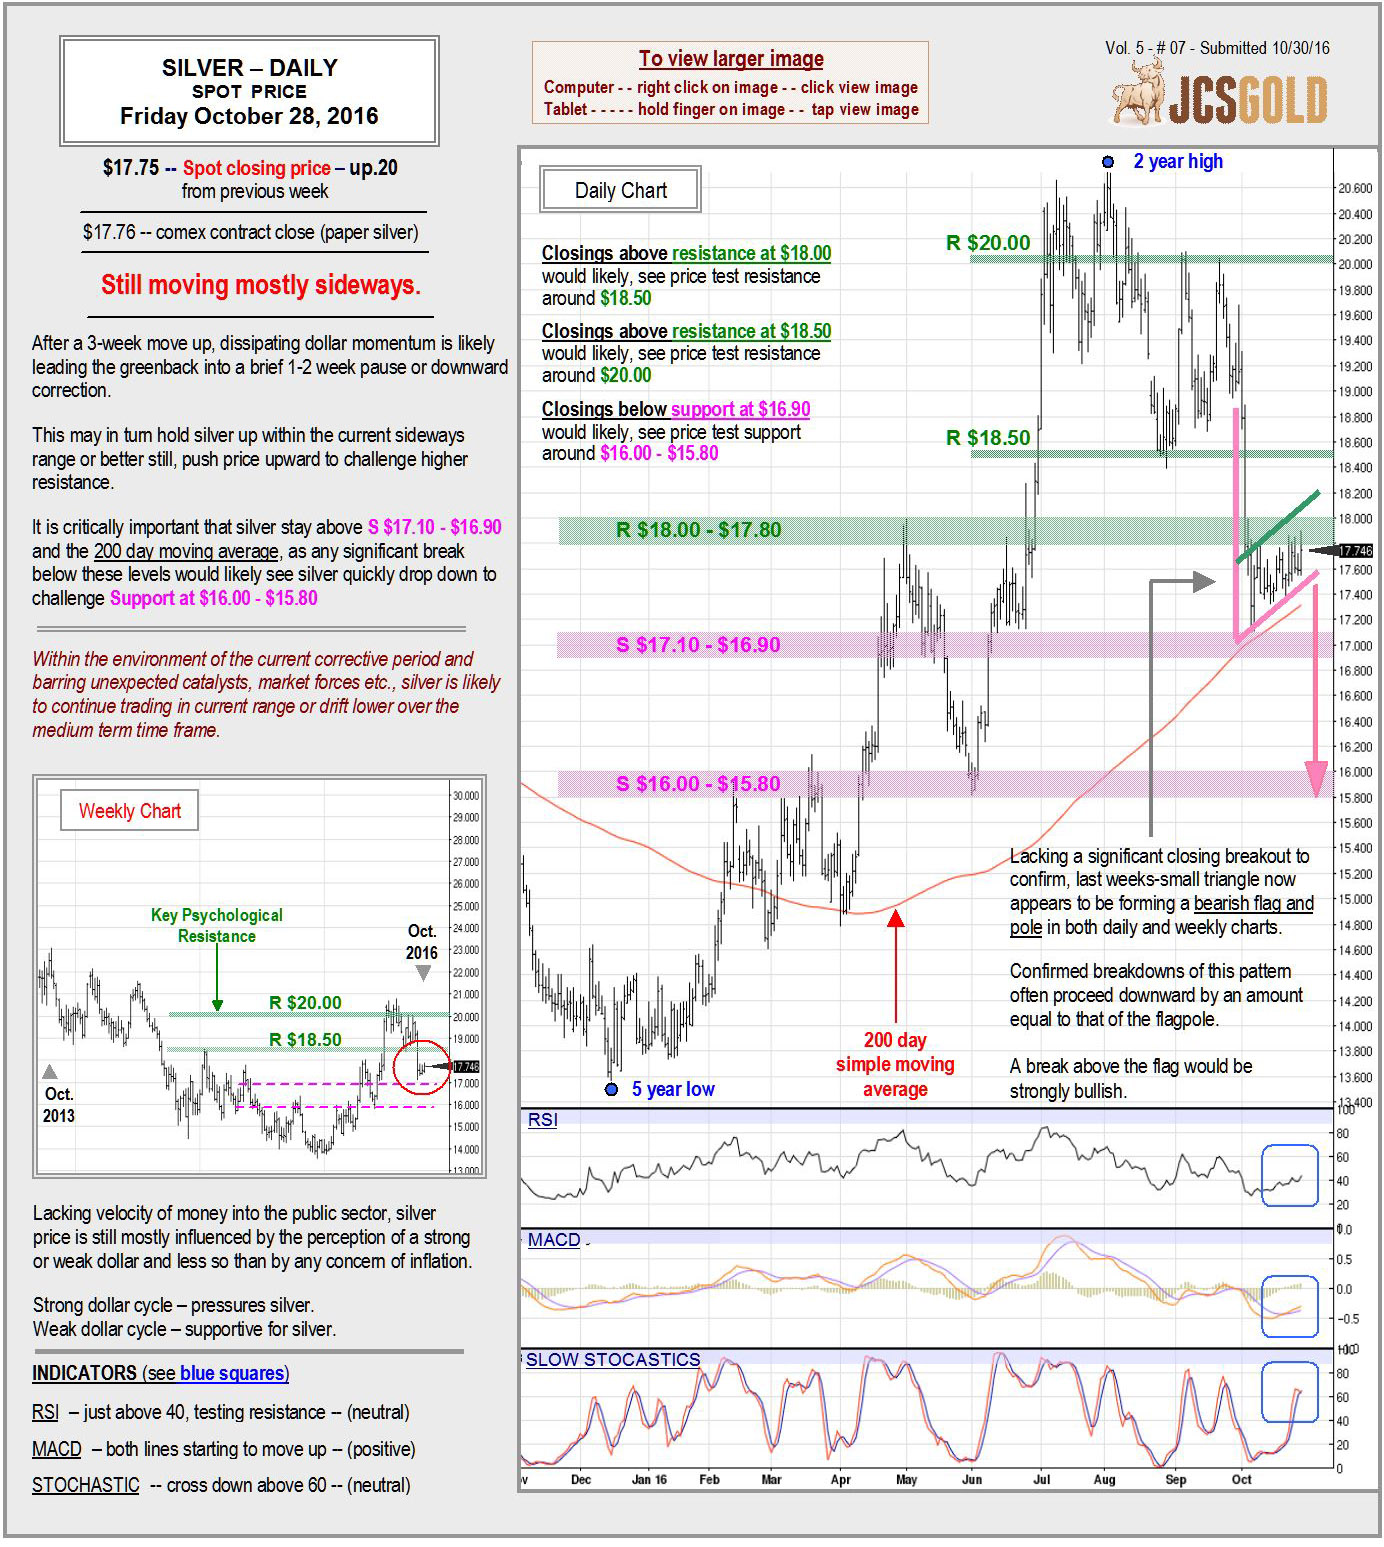 Oct 28, 2016 chart & commentary